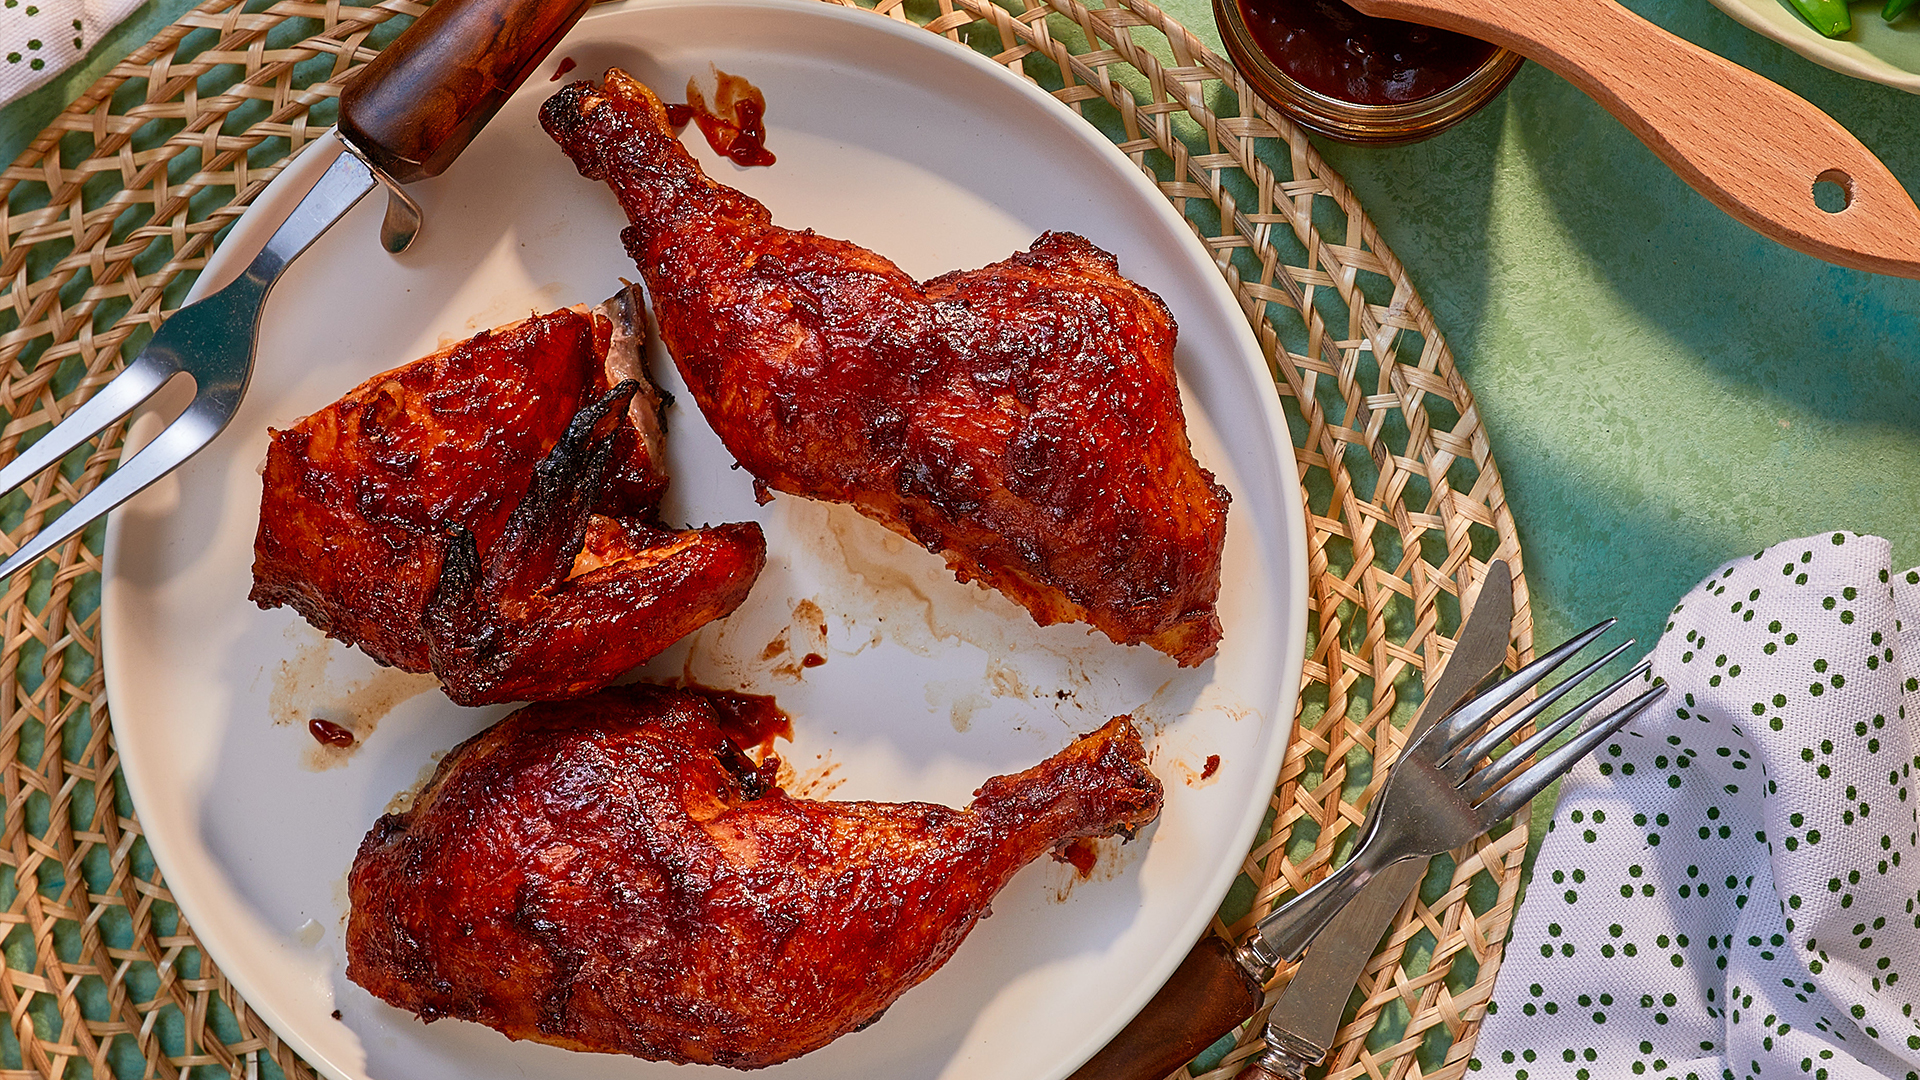 Barbecued chicken with tangy BBQ sauce